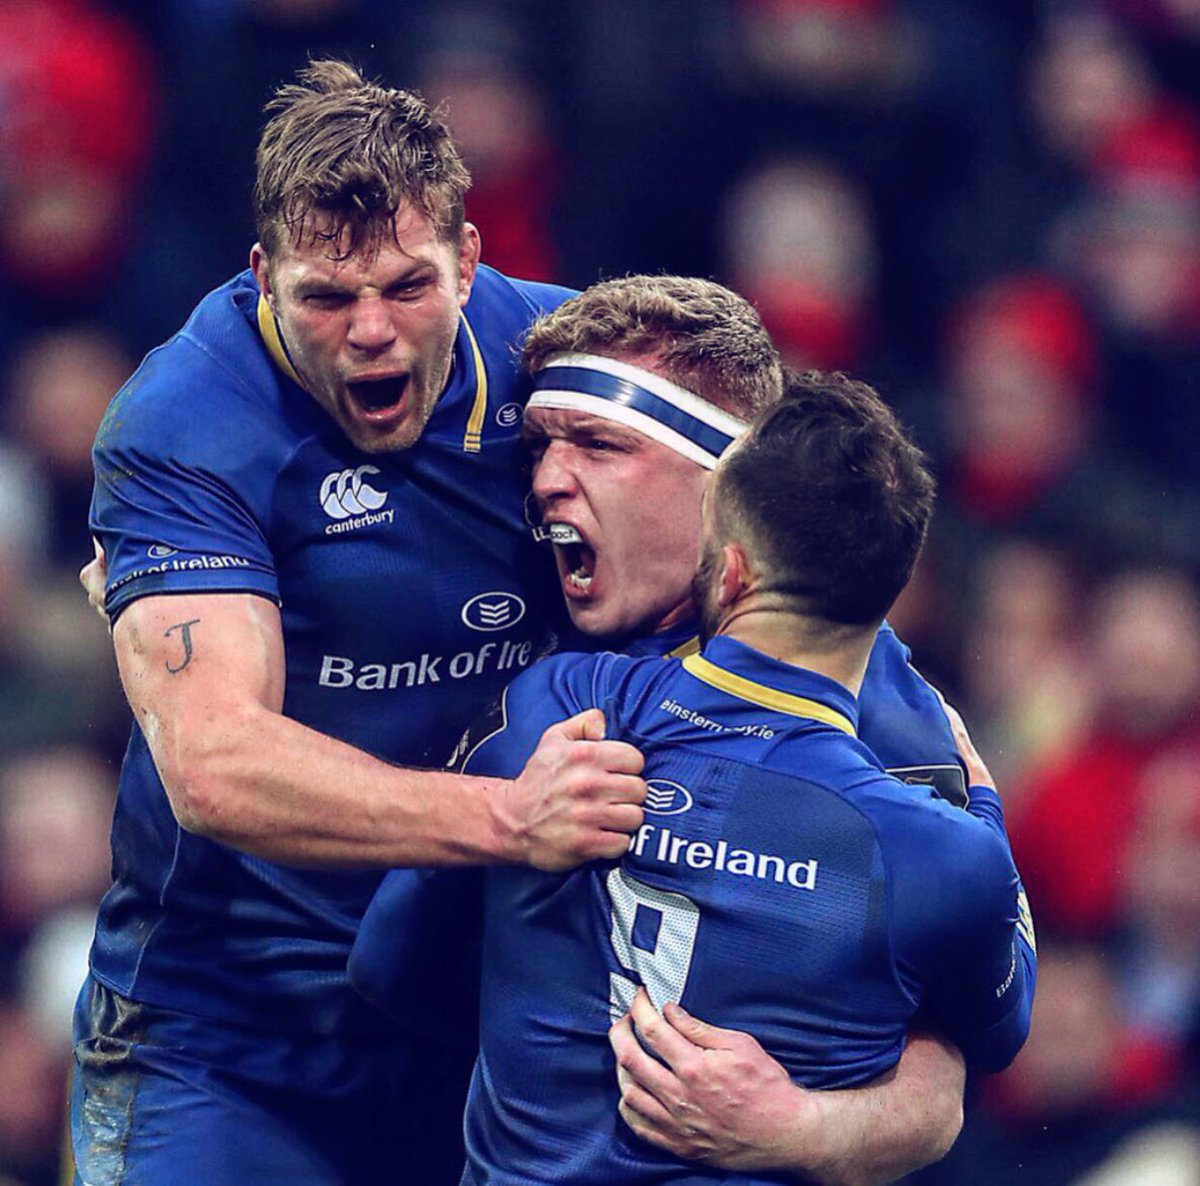 Mad game. Mad atmosphere. Awesome feeling picking up the W with the brothers 🔵⚪️ @leinsterrugby @OLSCRugby